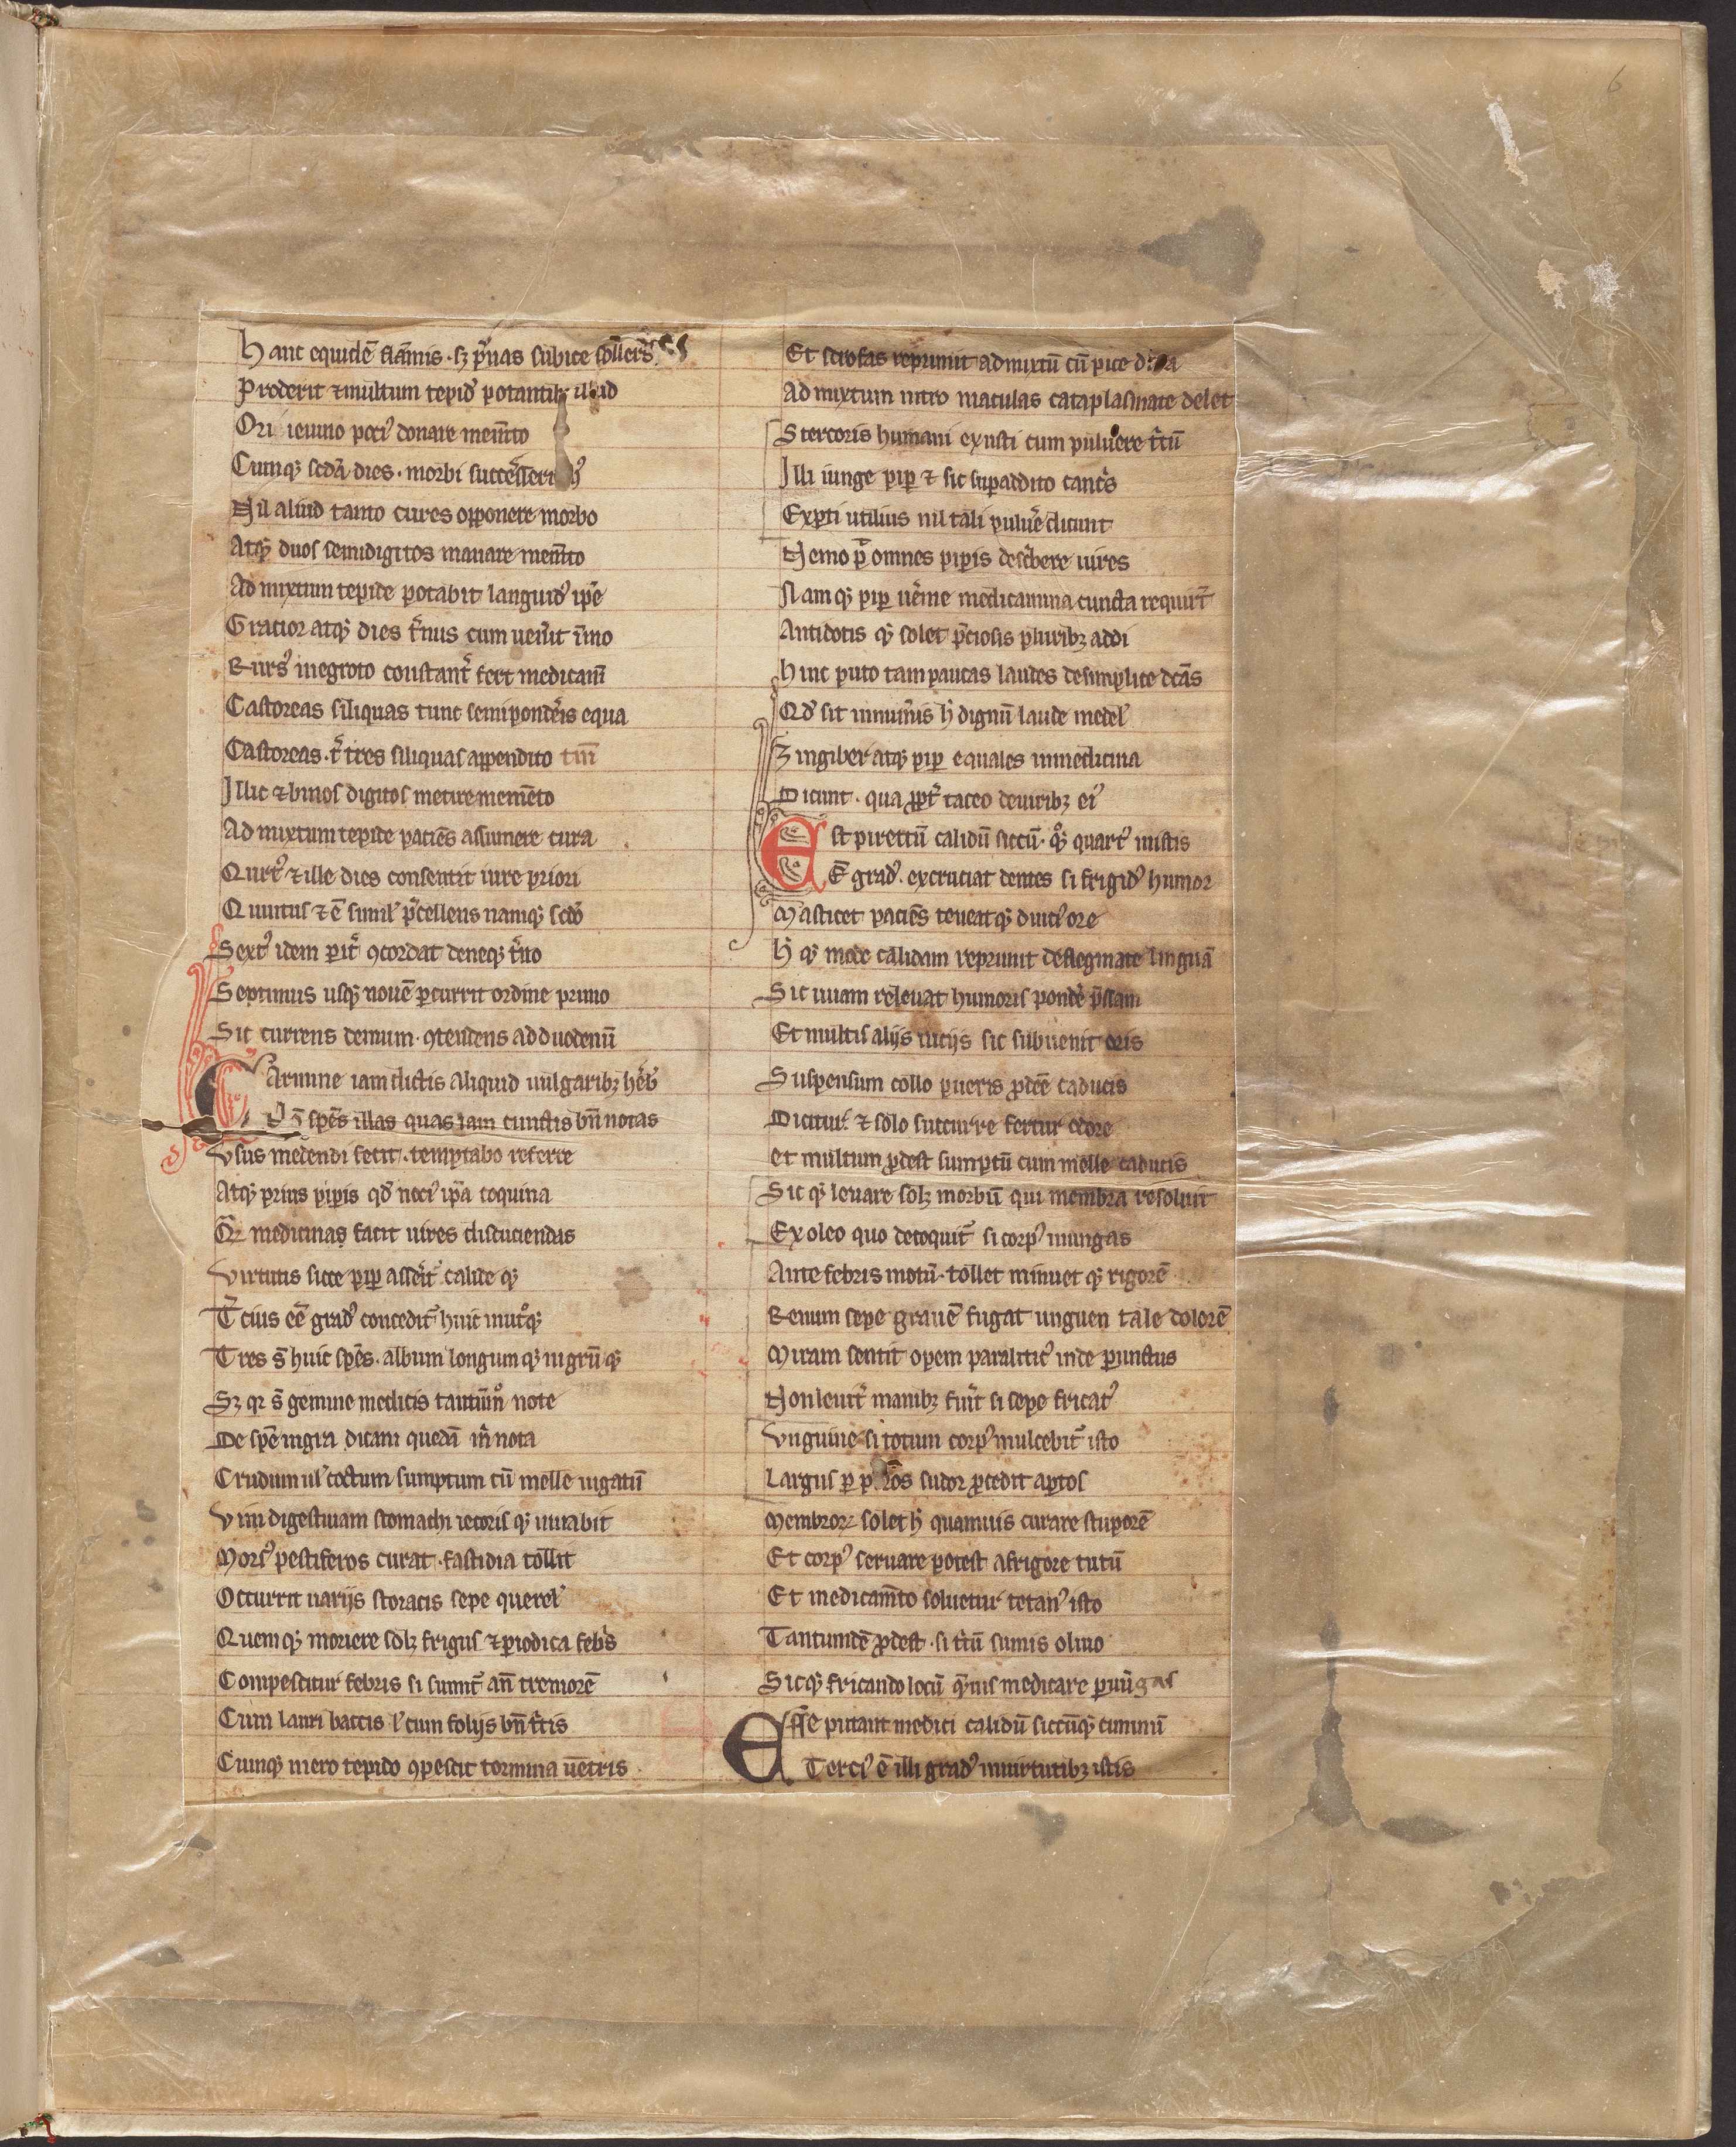 A section of the medieval herbal manuscript on 2 damaged leaves | The